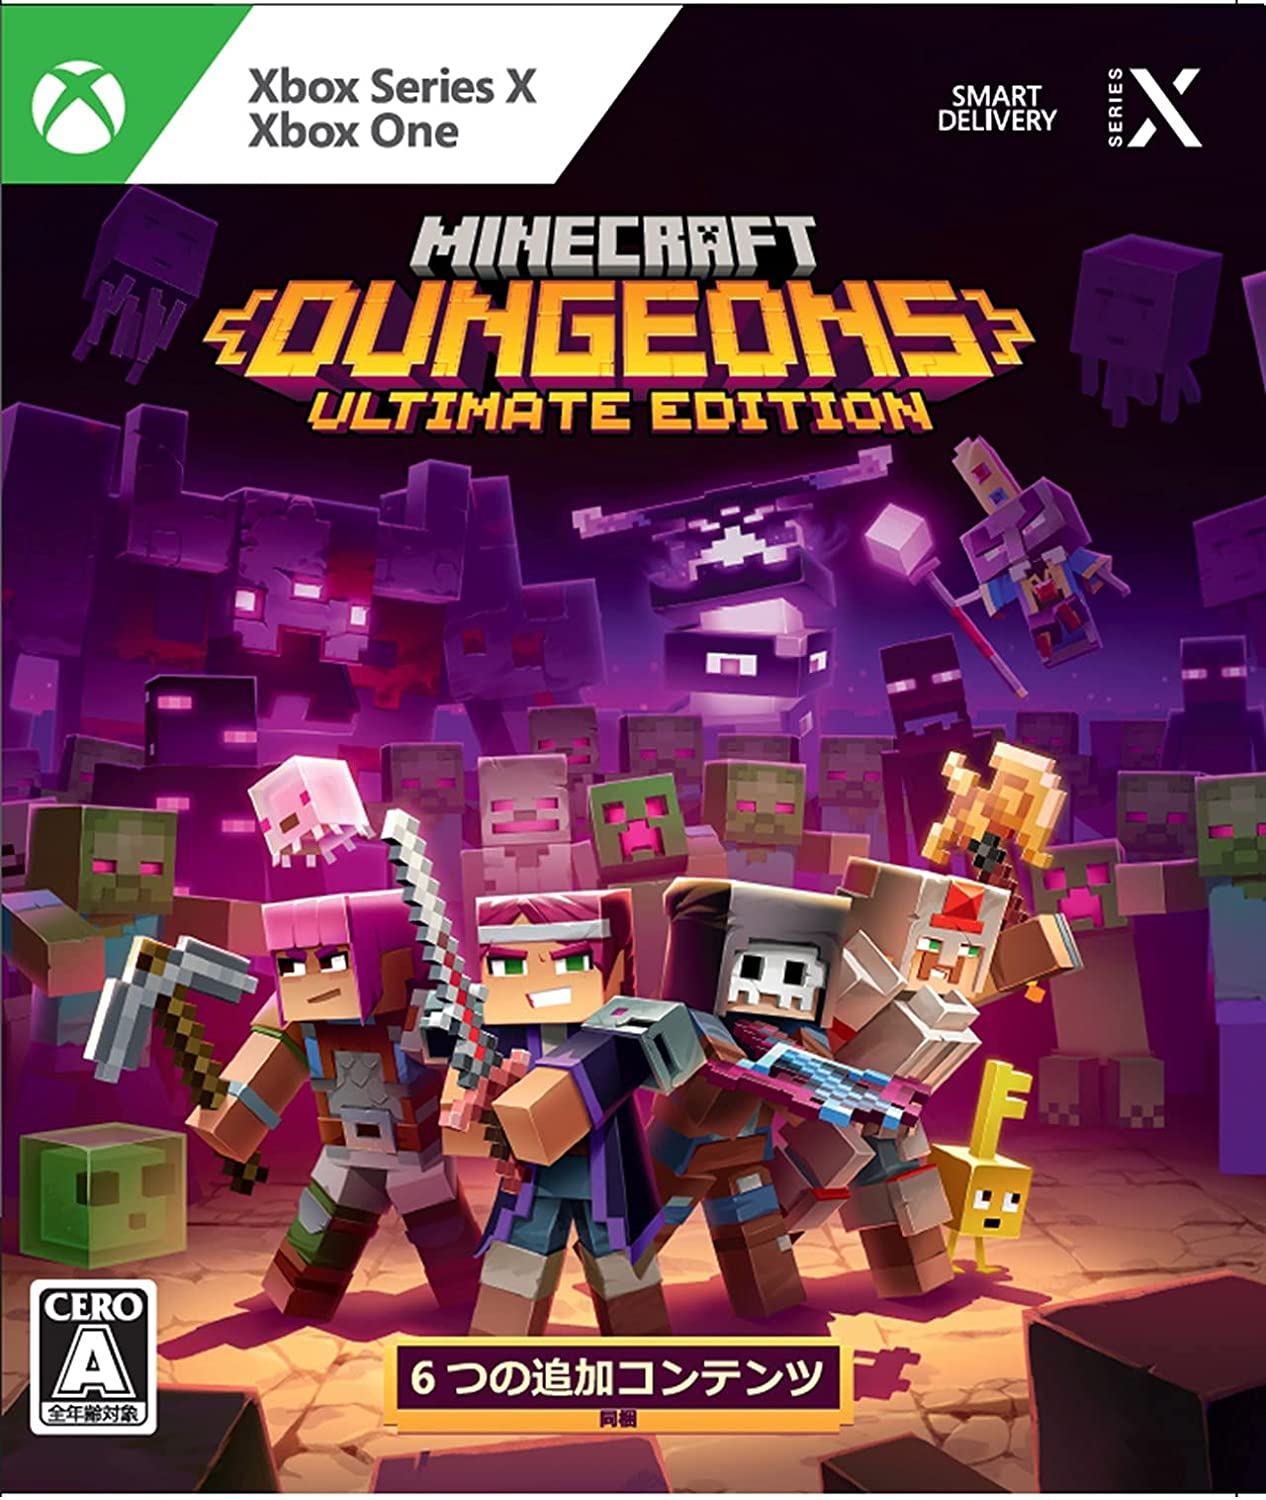 Minecraft Dungeons [Ultimate Edition] for Xbox One, Xbox Series X